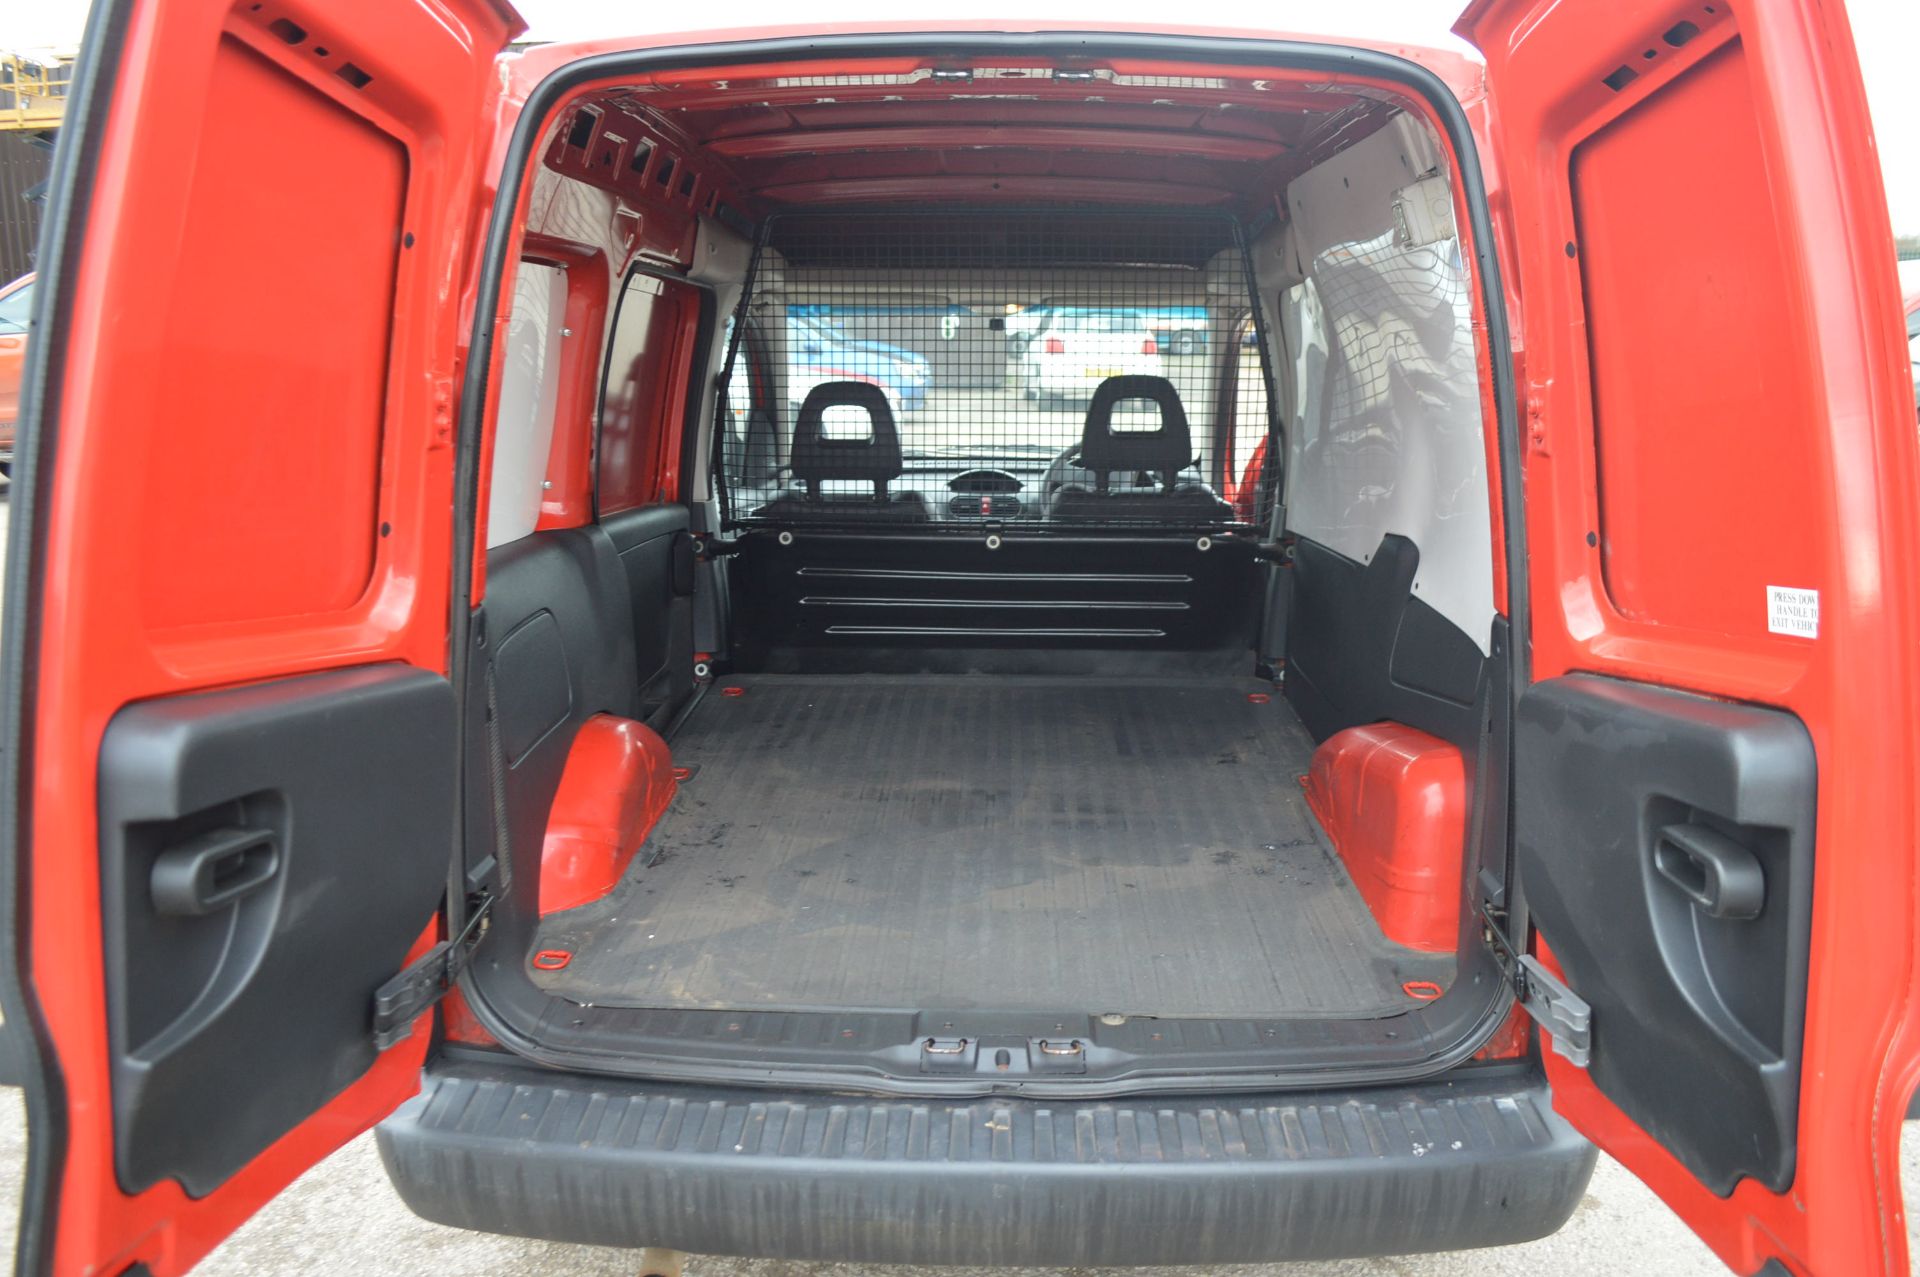 2008/57 REG VAUXHALL COMBO 1700 CDTI, SHOWING 1 OWNER FROM NEW *NO VAT* - Image 7 of 16